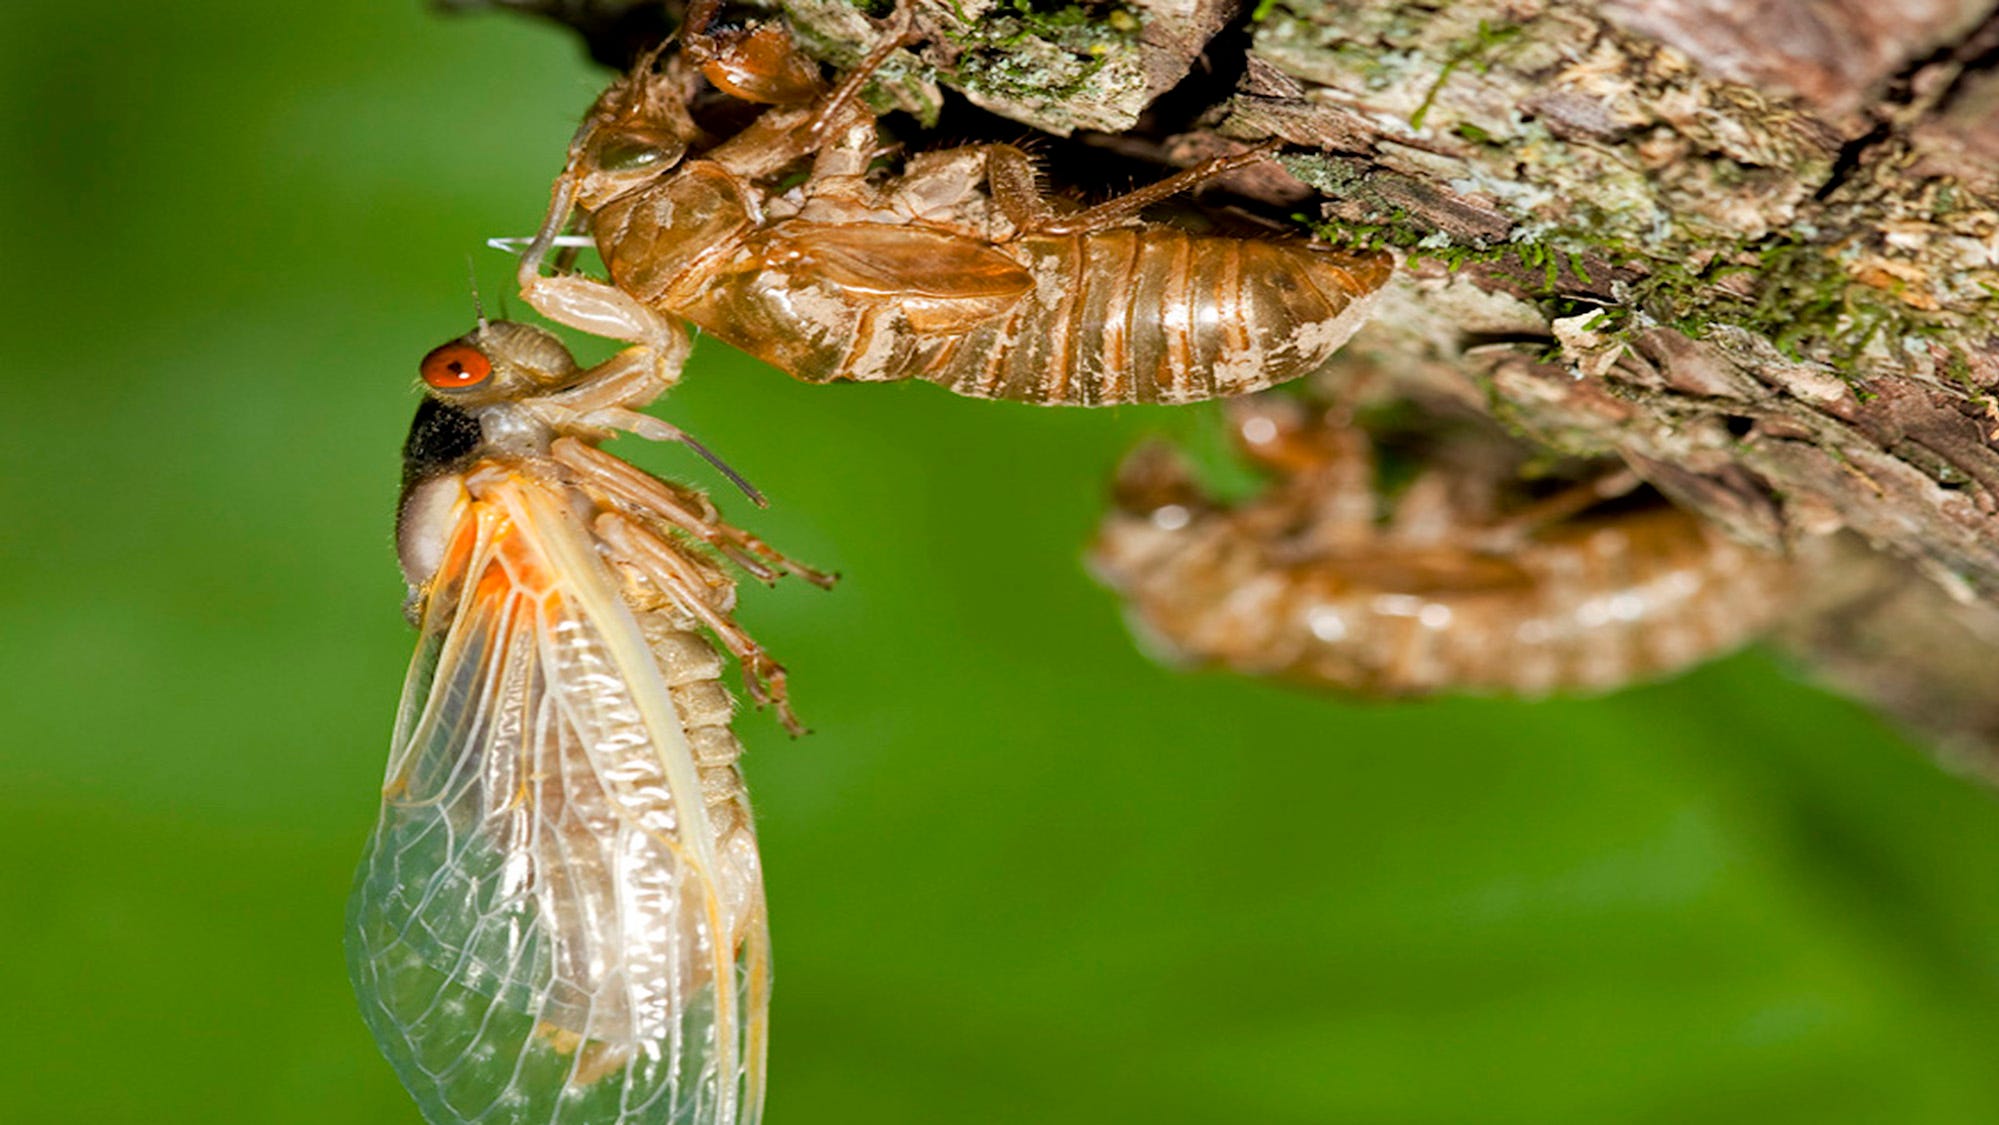 Cicadas begin emerging in Michigan Here's what to expect